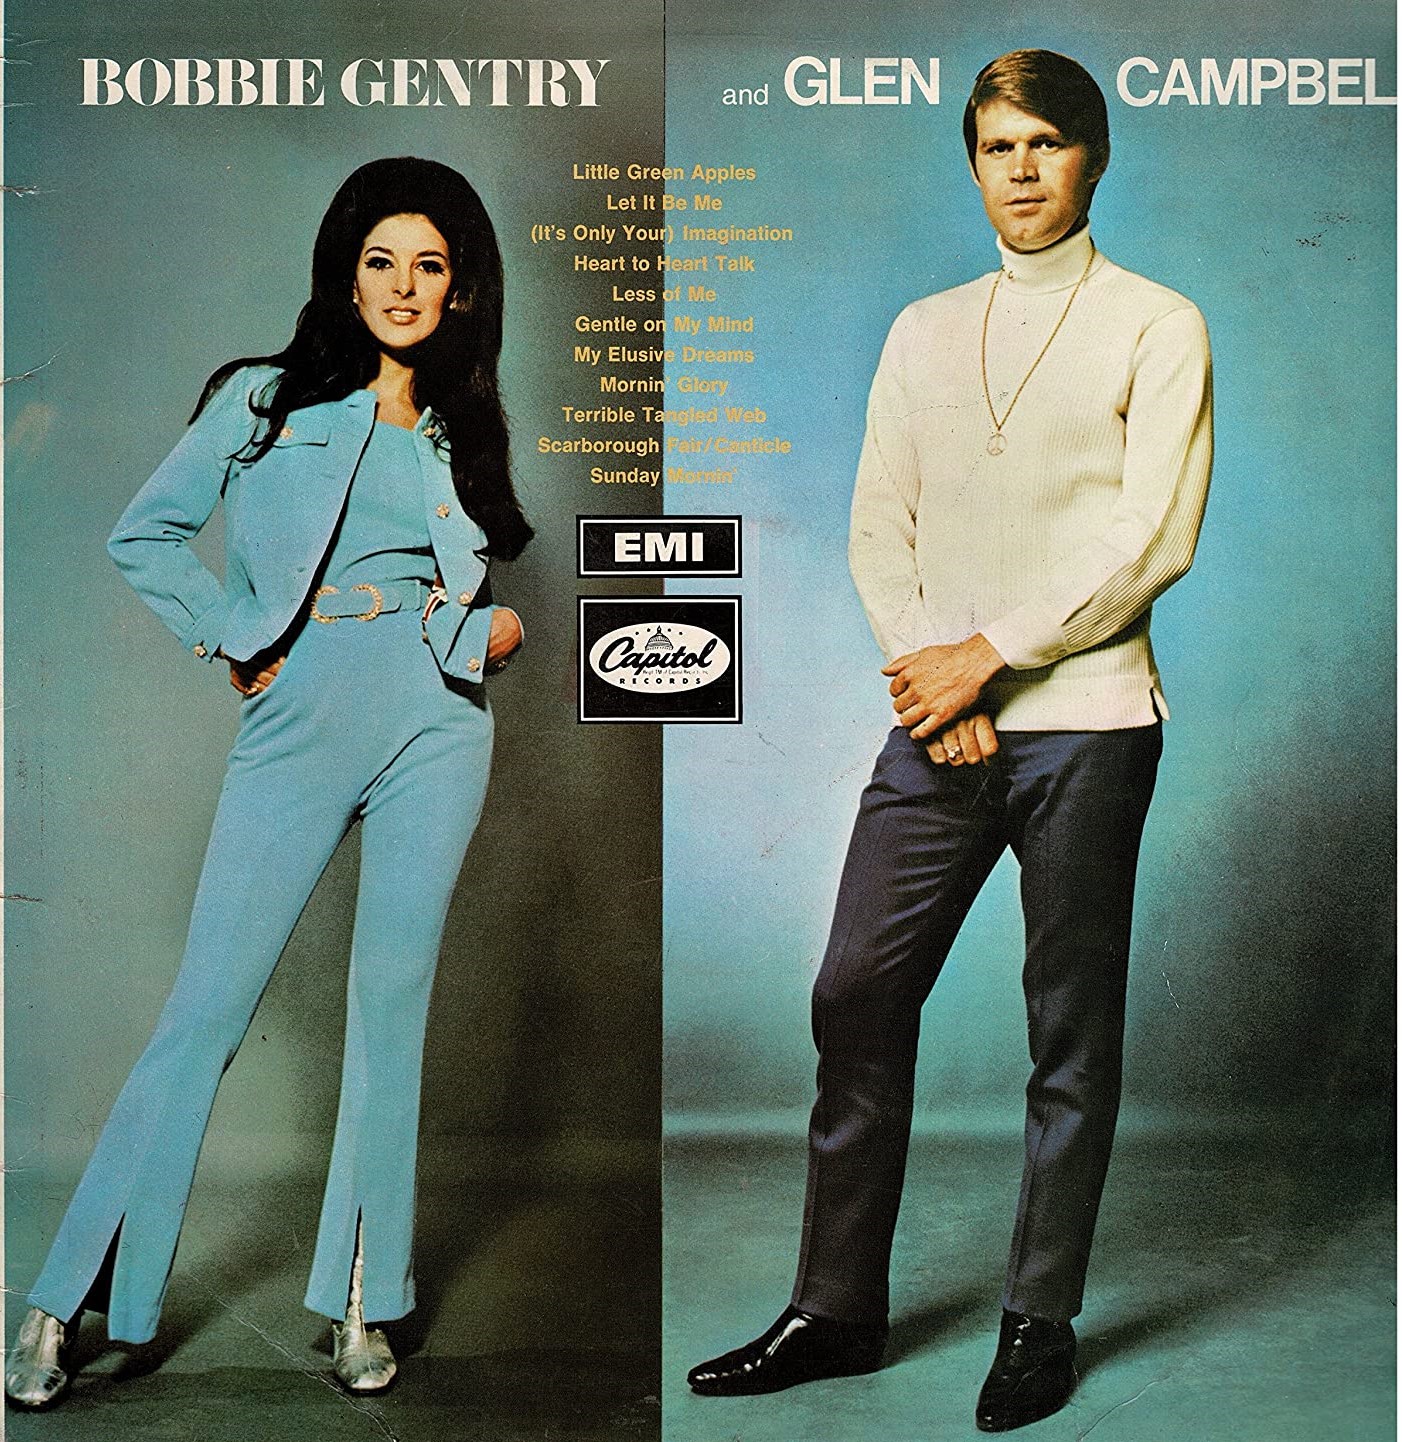 Dreamy Duet with Bobby Gentry and Glen Campbell.